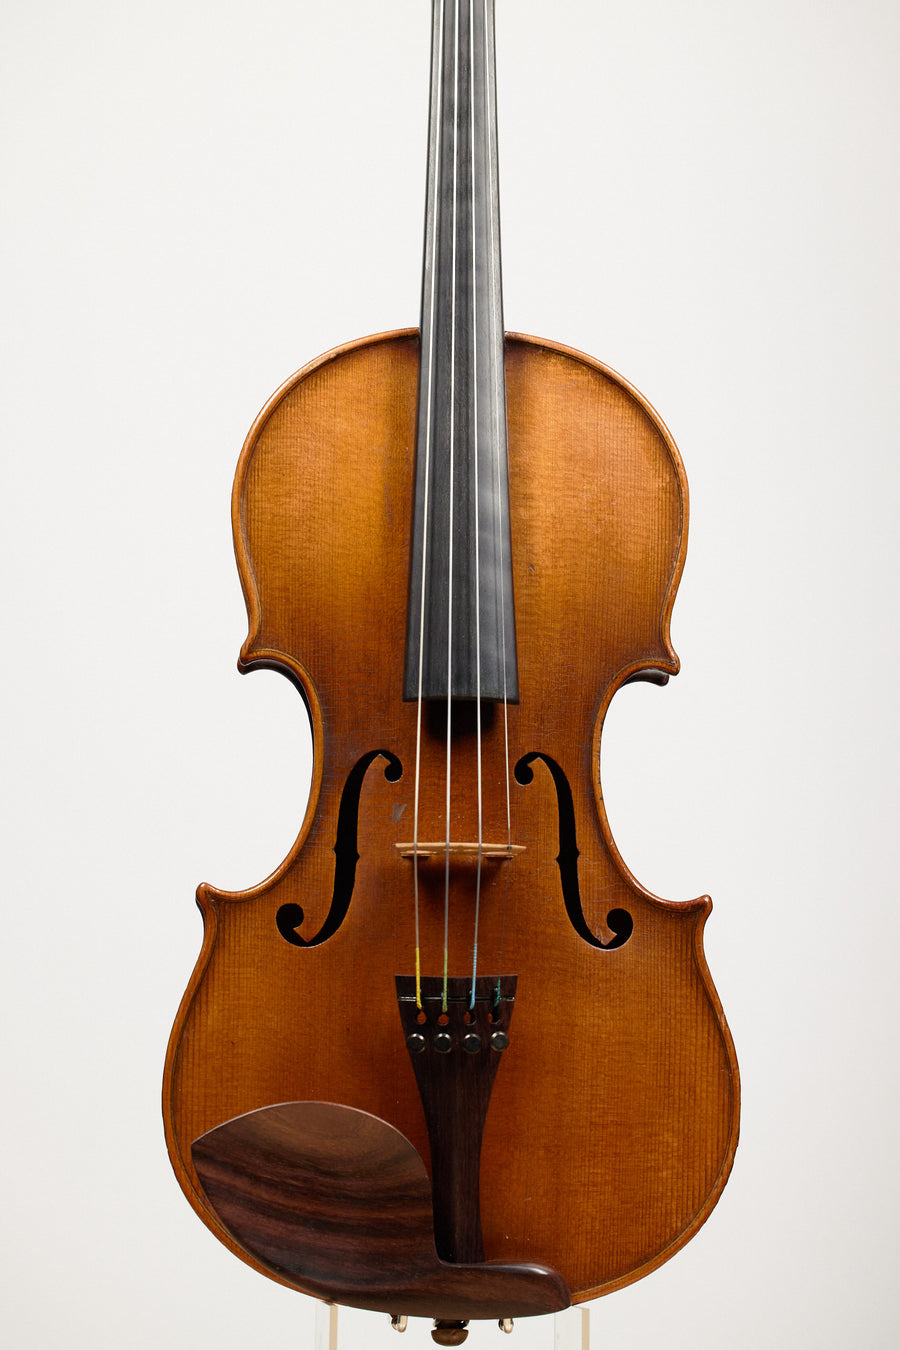 A French Violin Marketed By Williams & Sons in Toronto, Early 20th Century